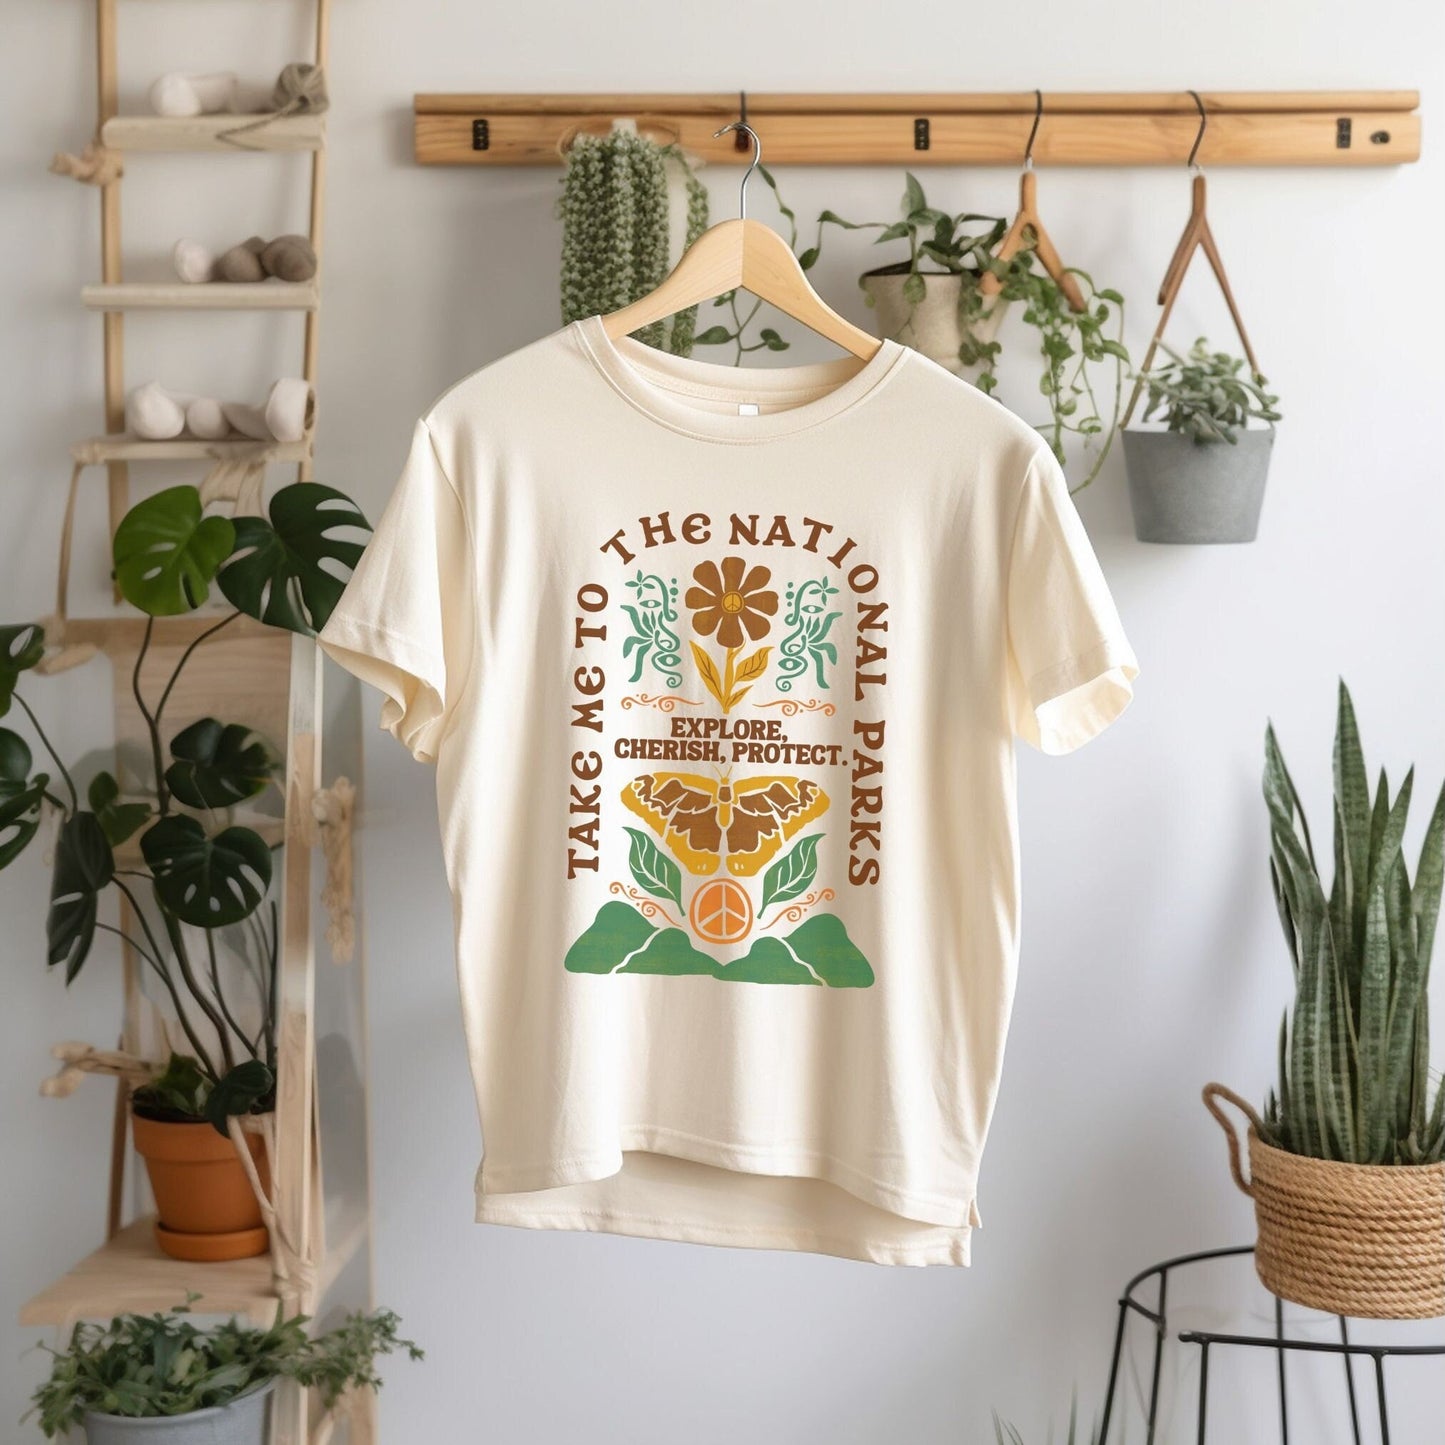 Take Me to the National Parks Shirt